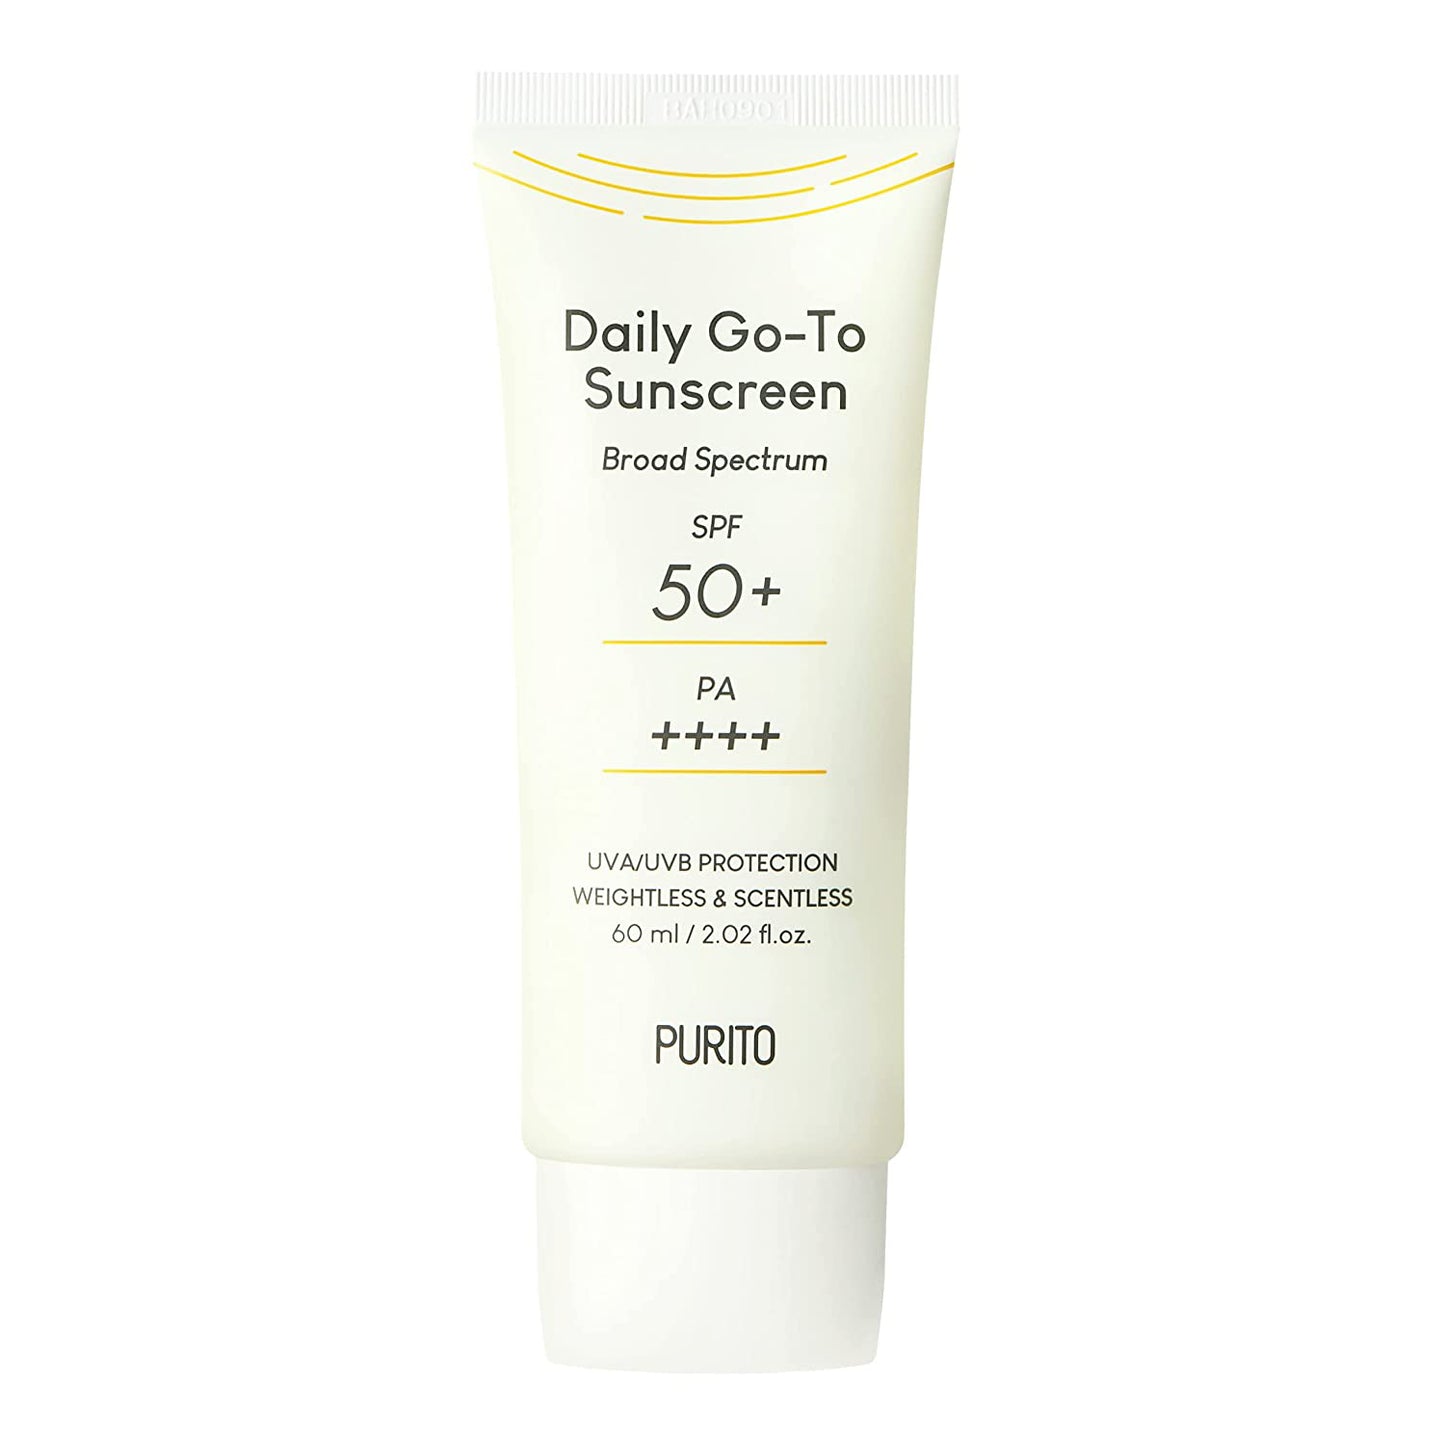 PURITO Daily Go-To Sunscreen (60ml 2.02 fl.oz.) SPF 50+ PA ++++ Safe Ingredients, UVA/UVB Protection, Broad-Spectrum, Calm, Soothing